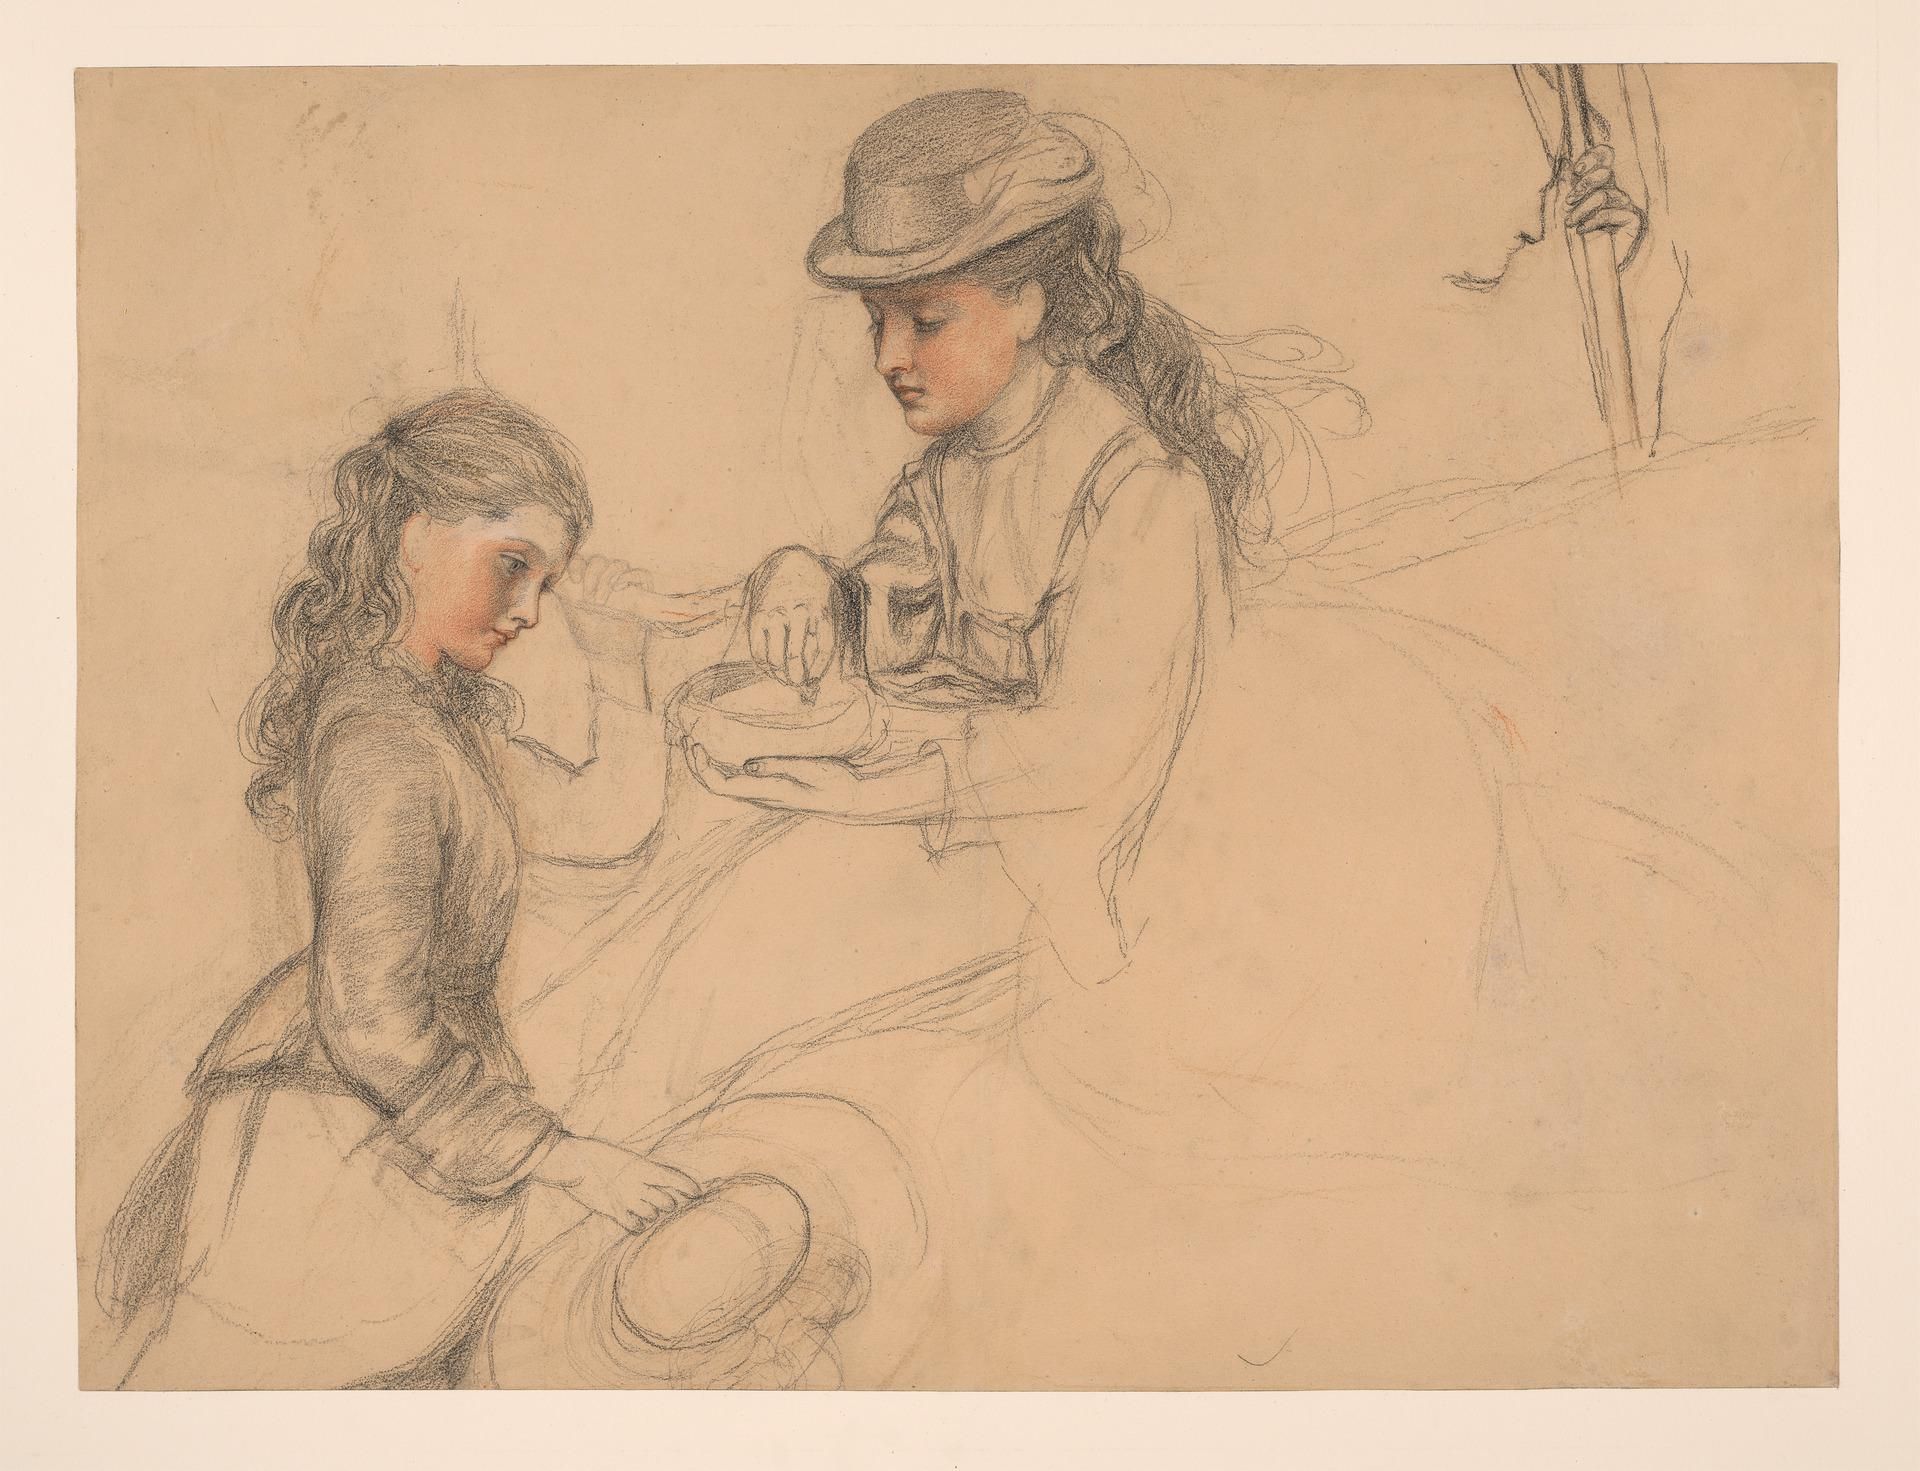 Study of two girls, with a study of a hand to the right